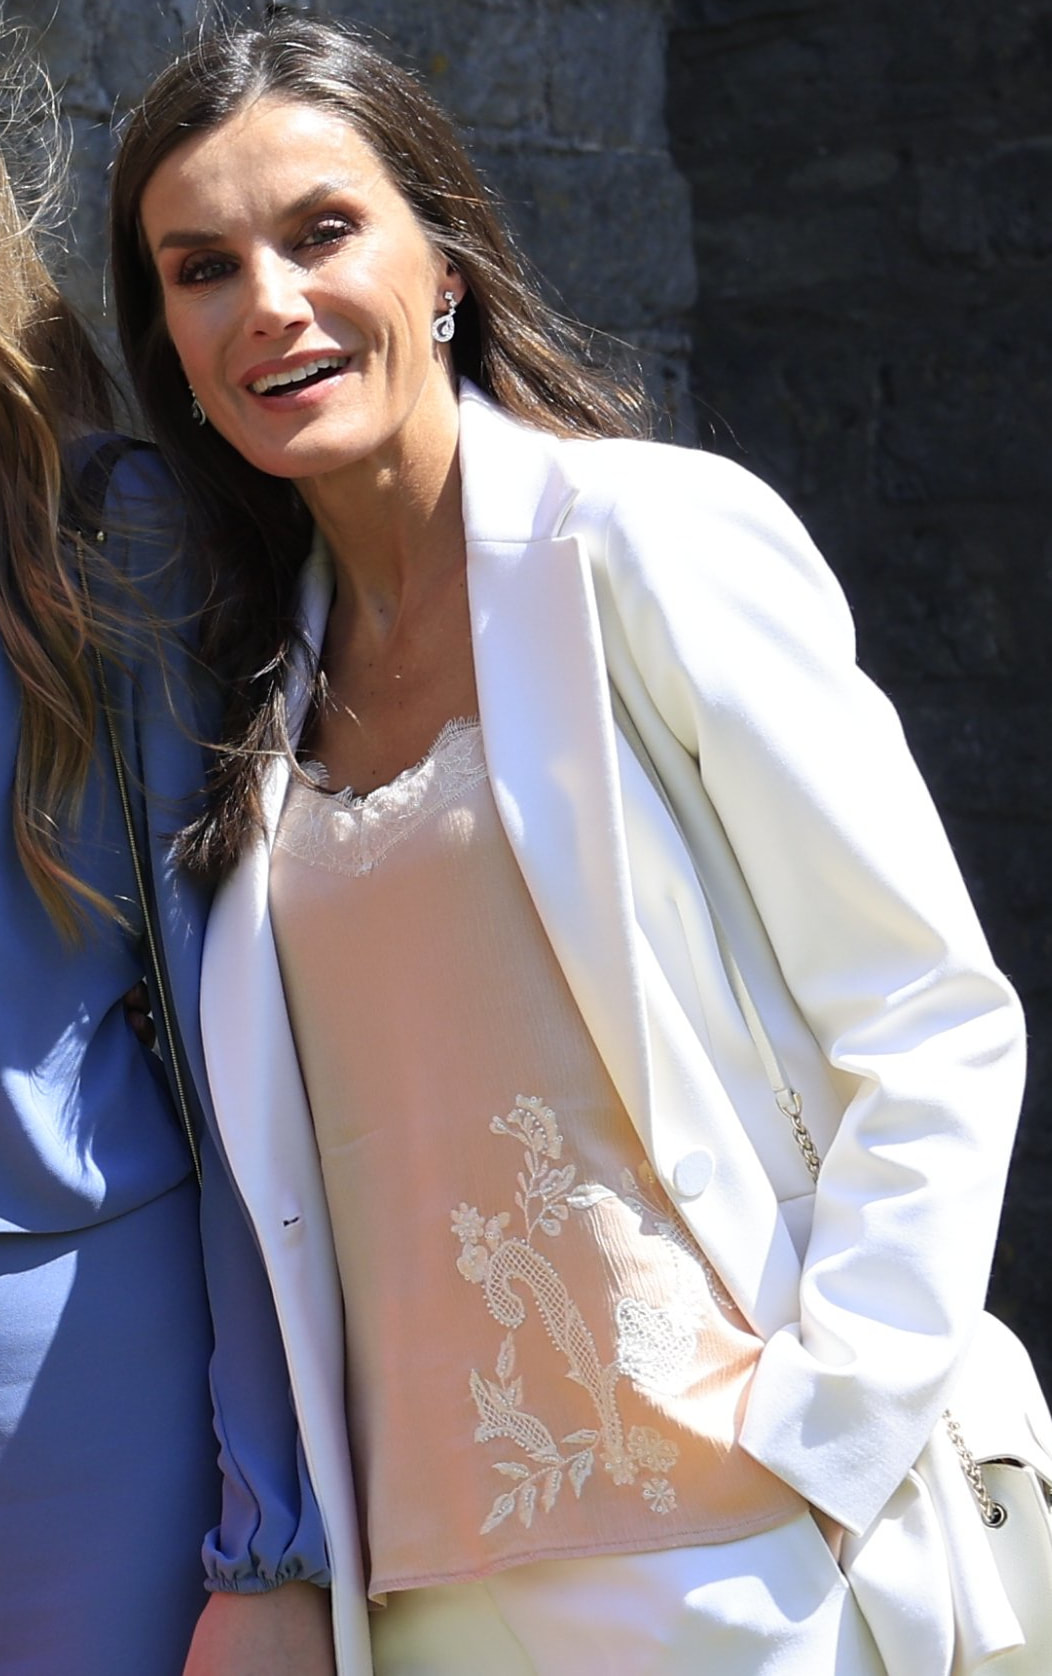 Queen Letizia wears Zara Embroidered Camisole Top in Nude Pink